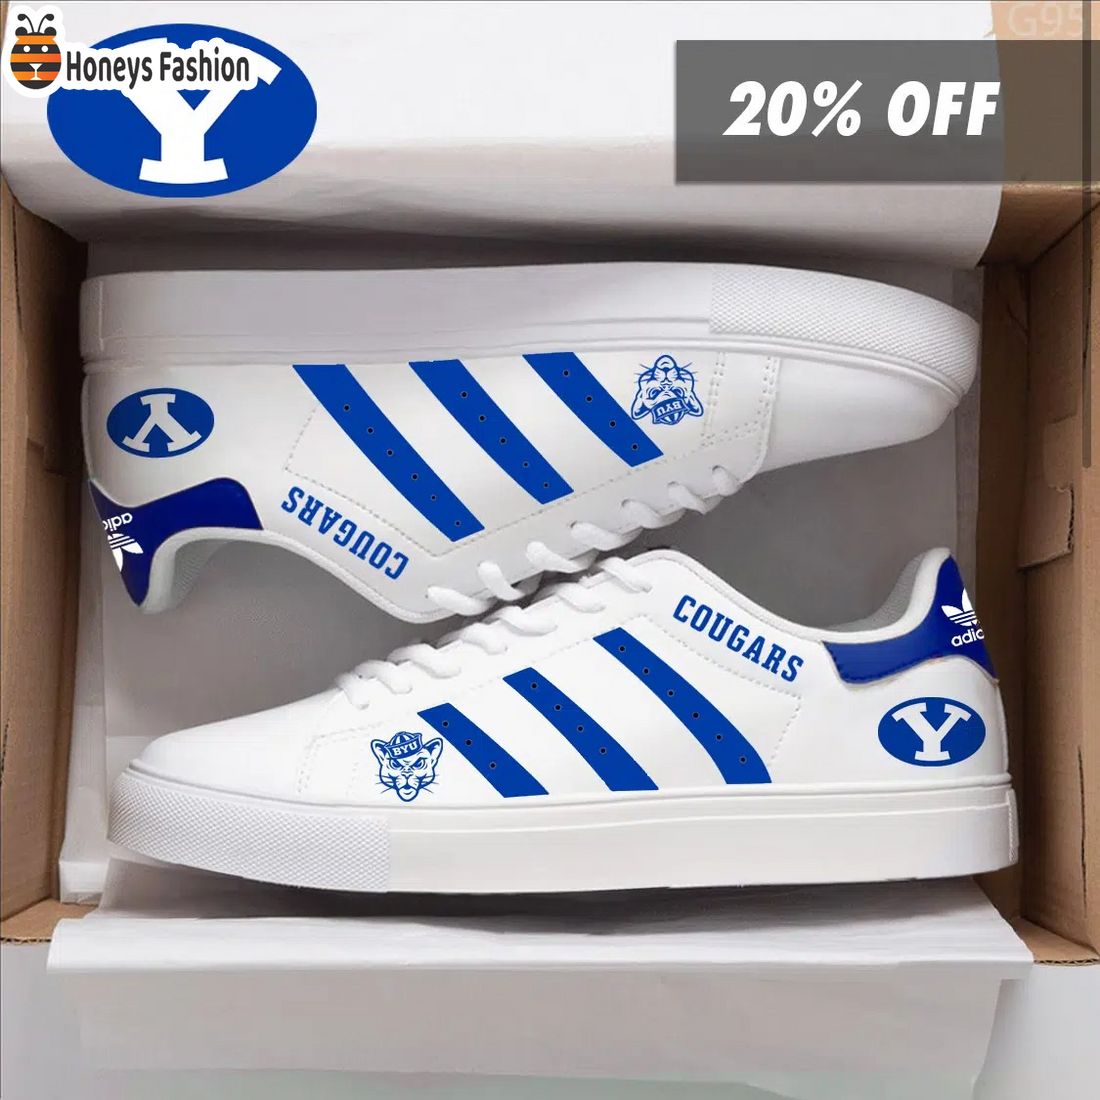 Byu Cougars NCAA Adidas Stan Smith Shoes